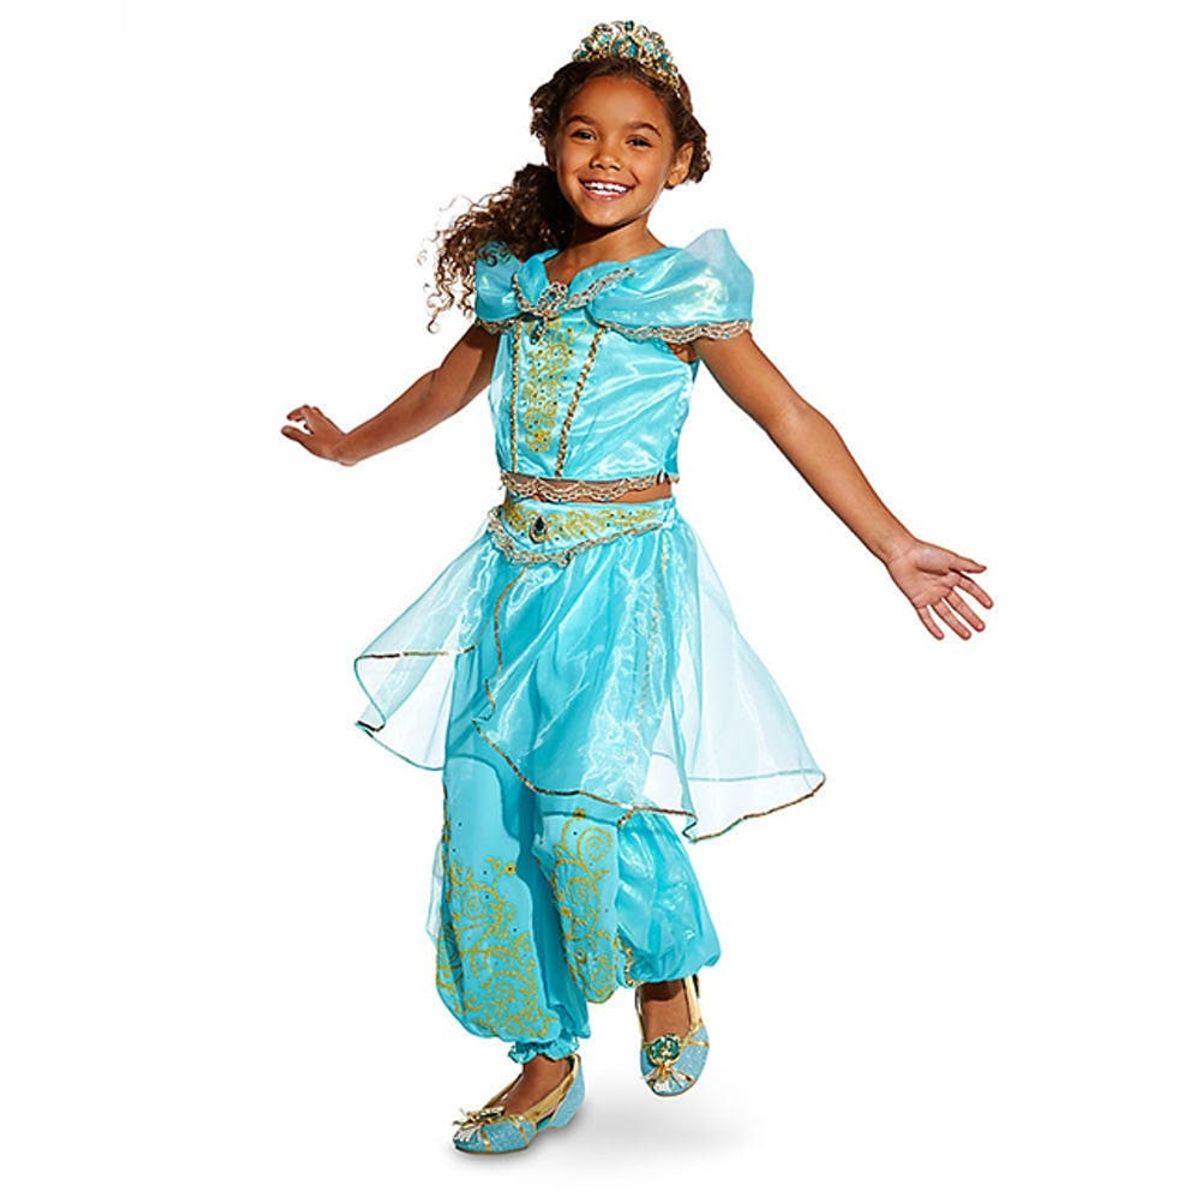 The Major Change Disney Is Making to Its Halloween Costumes for Kids ...